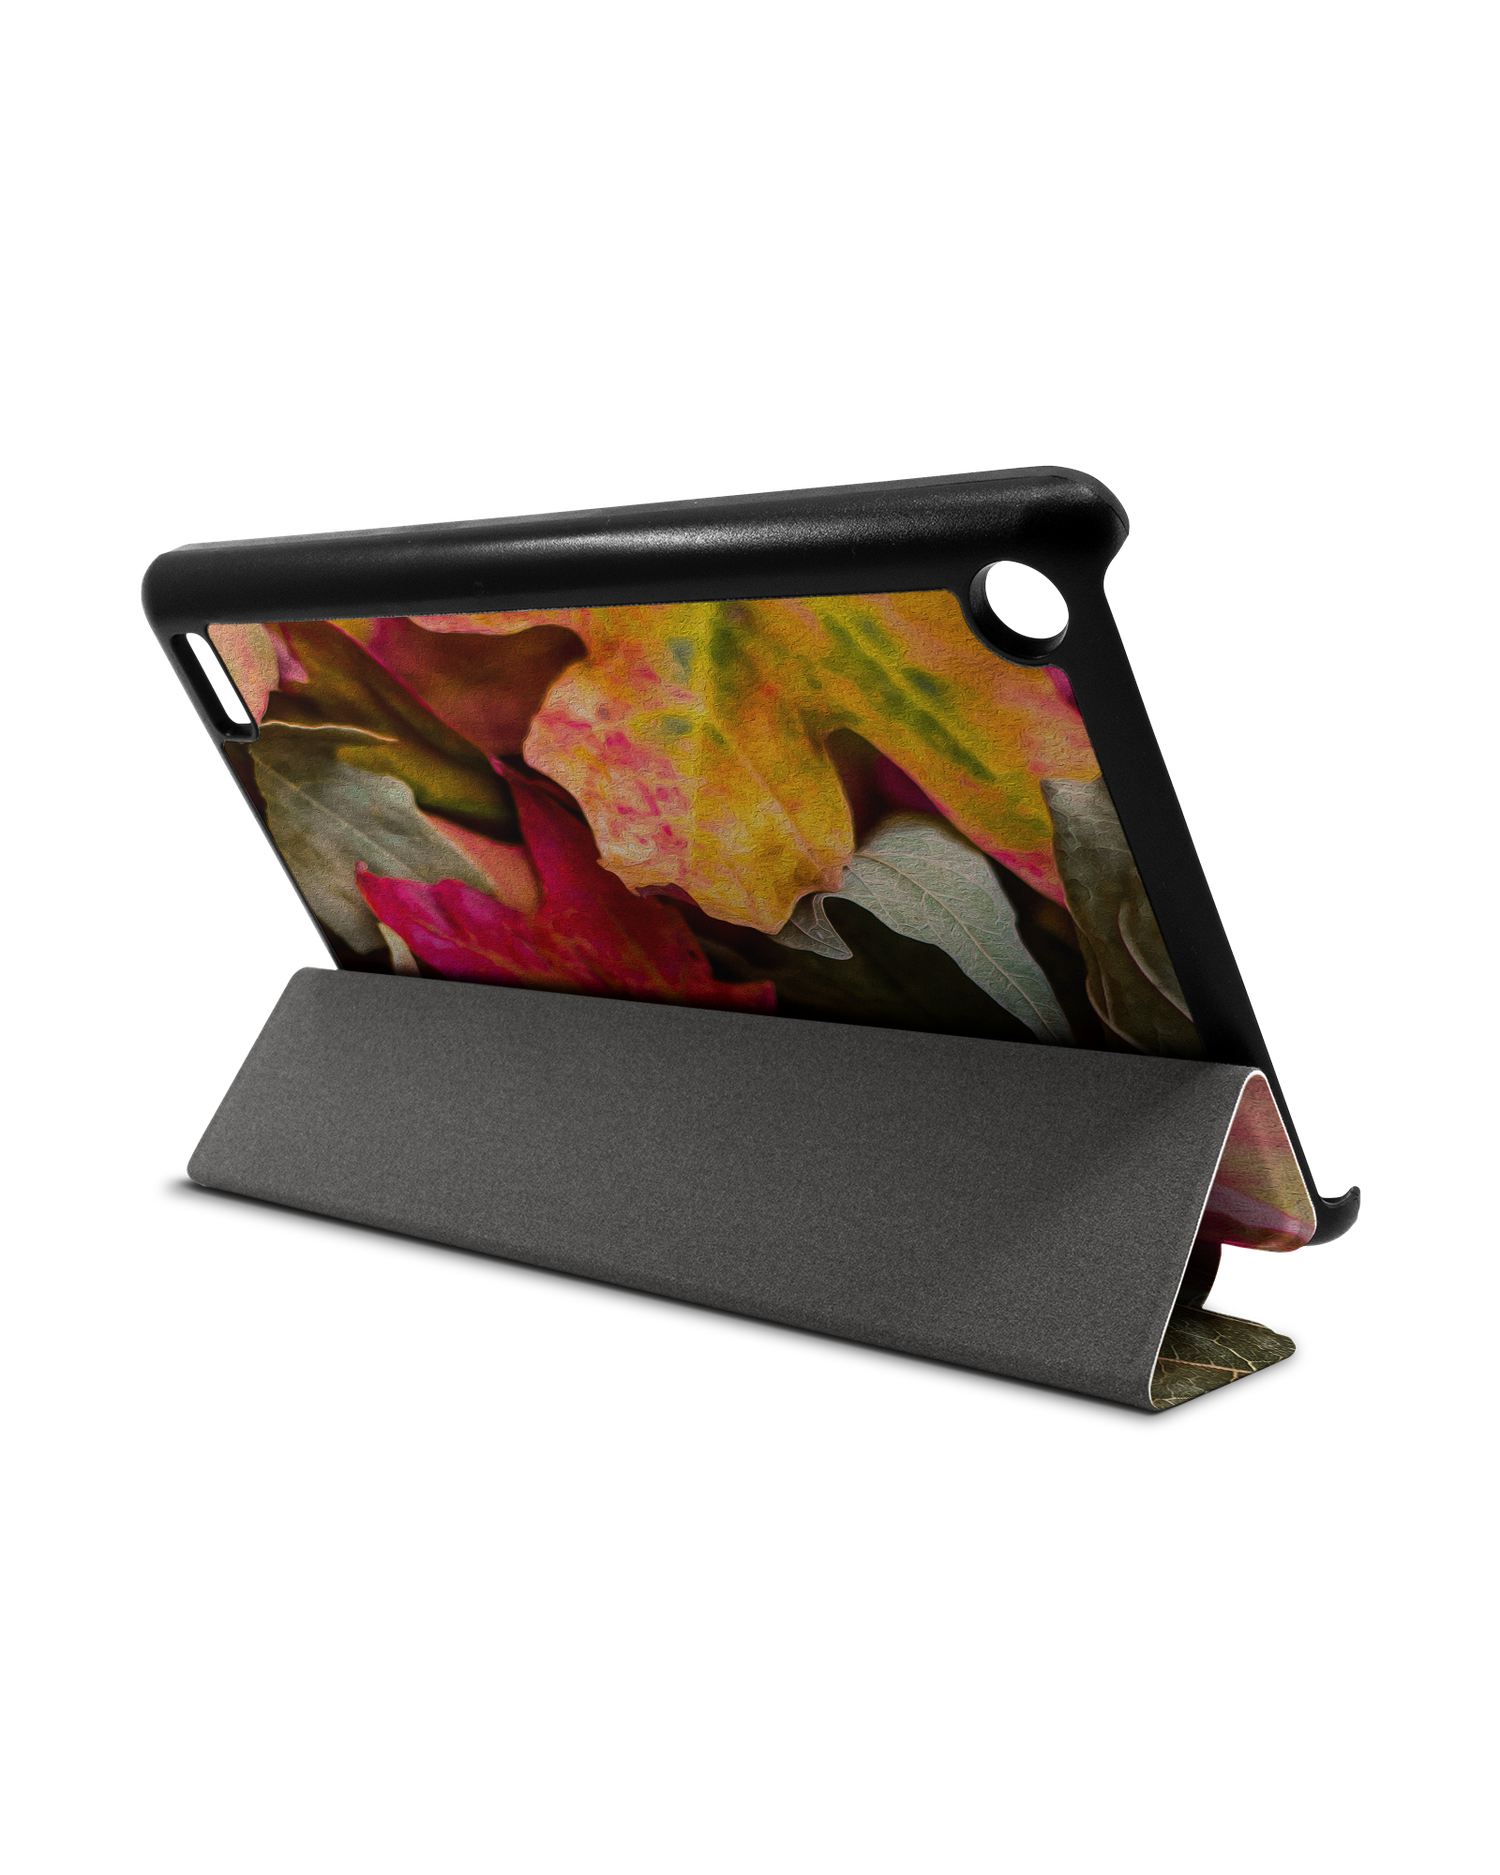 Autumn Leaves Tablet Smart Case for Amazon Fire 7: Used as Stand